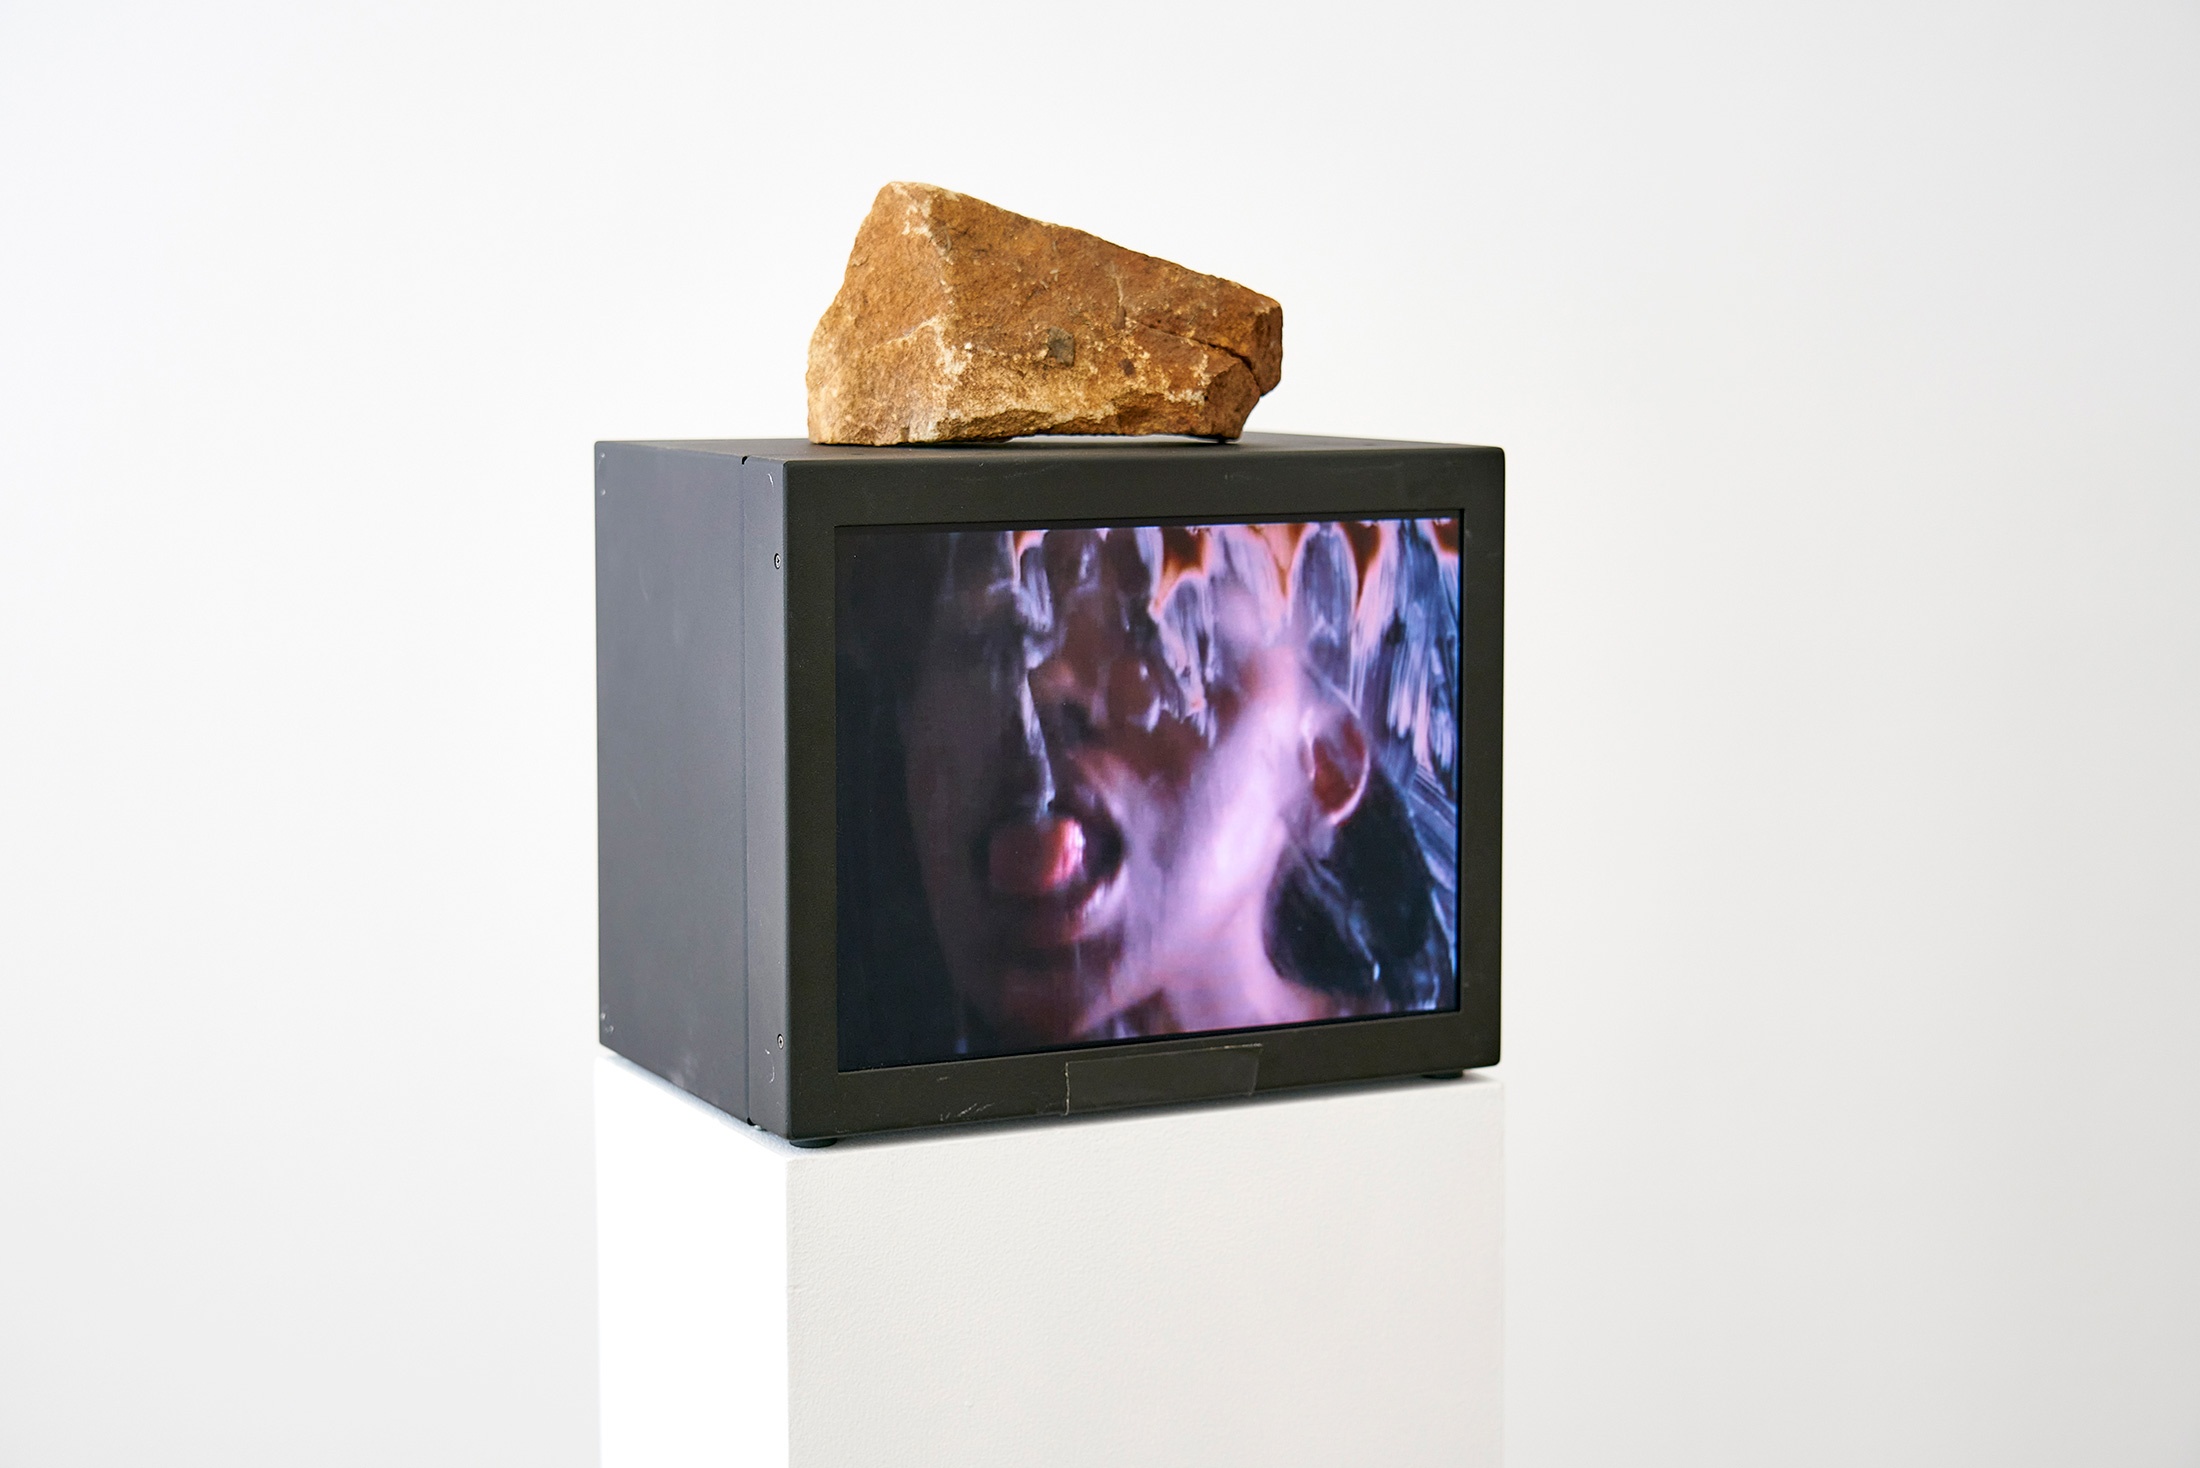 Installation photograph that shows Dineo Seshee Bopape’s video work ‘a love supreme’ playing on a video box that rests on a white plinth with a rock sitting on top of it.
